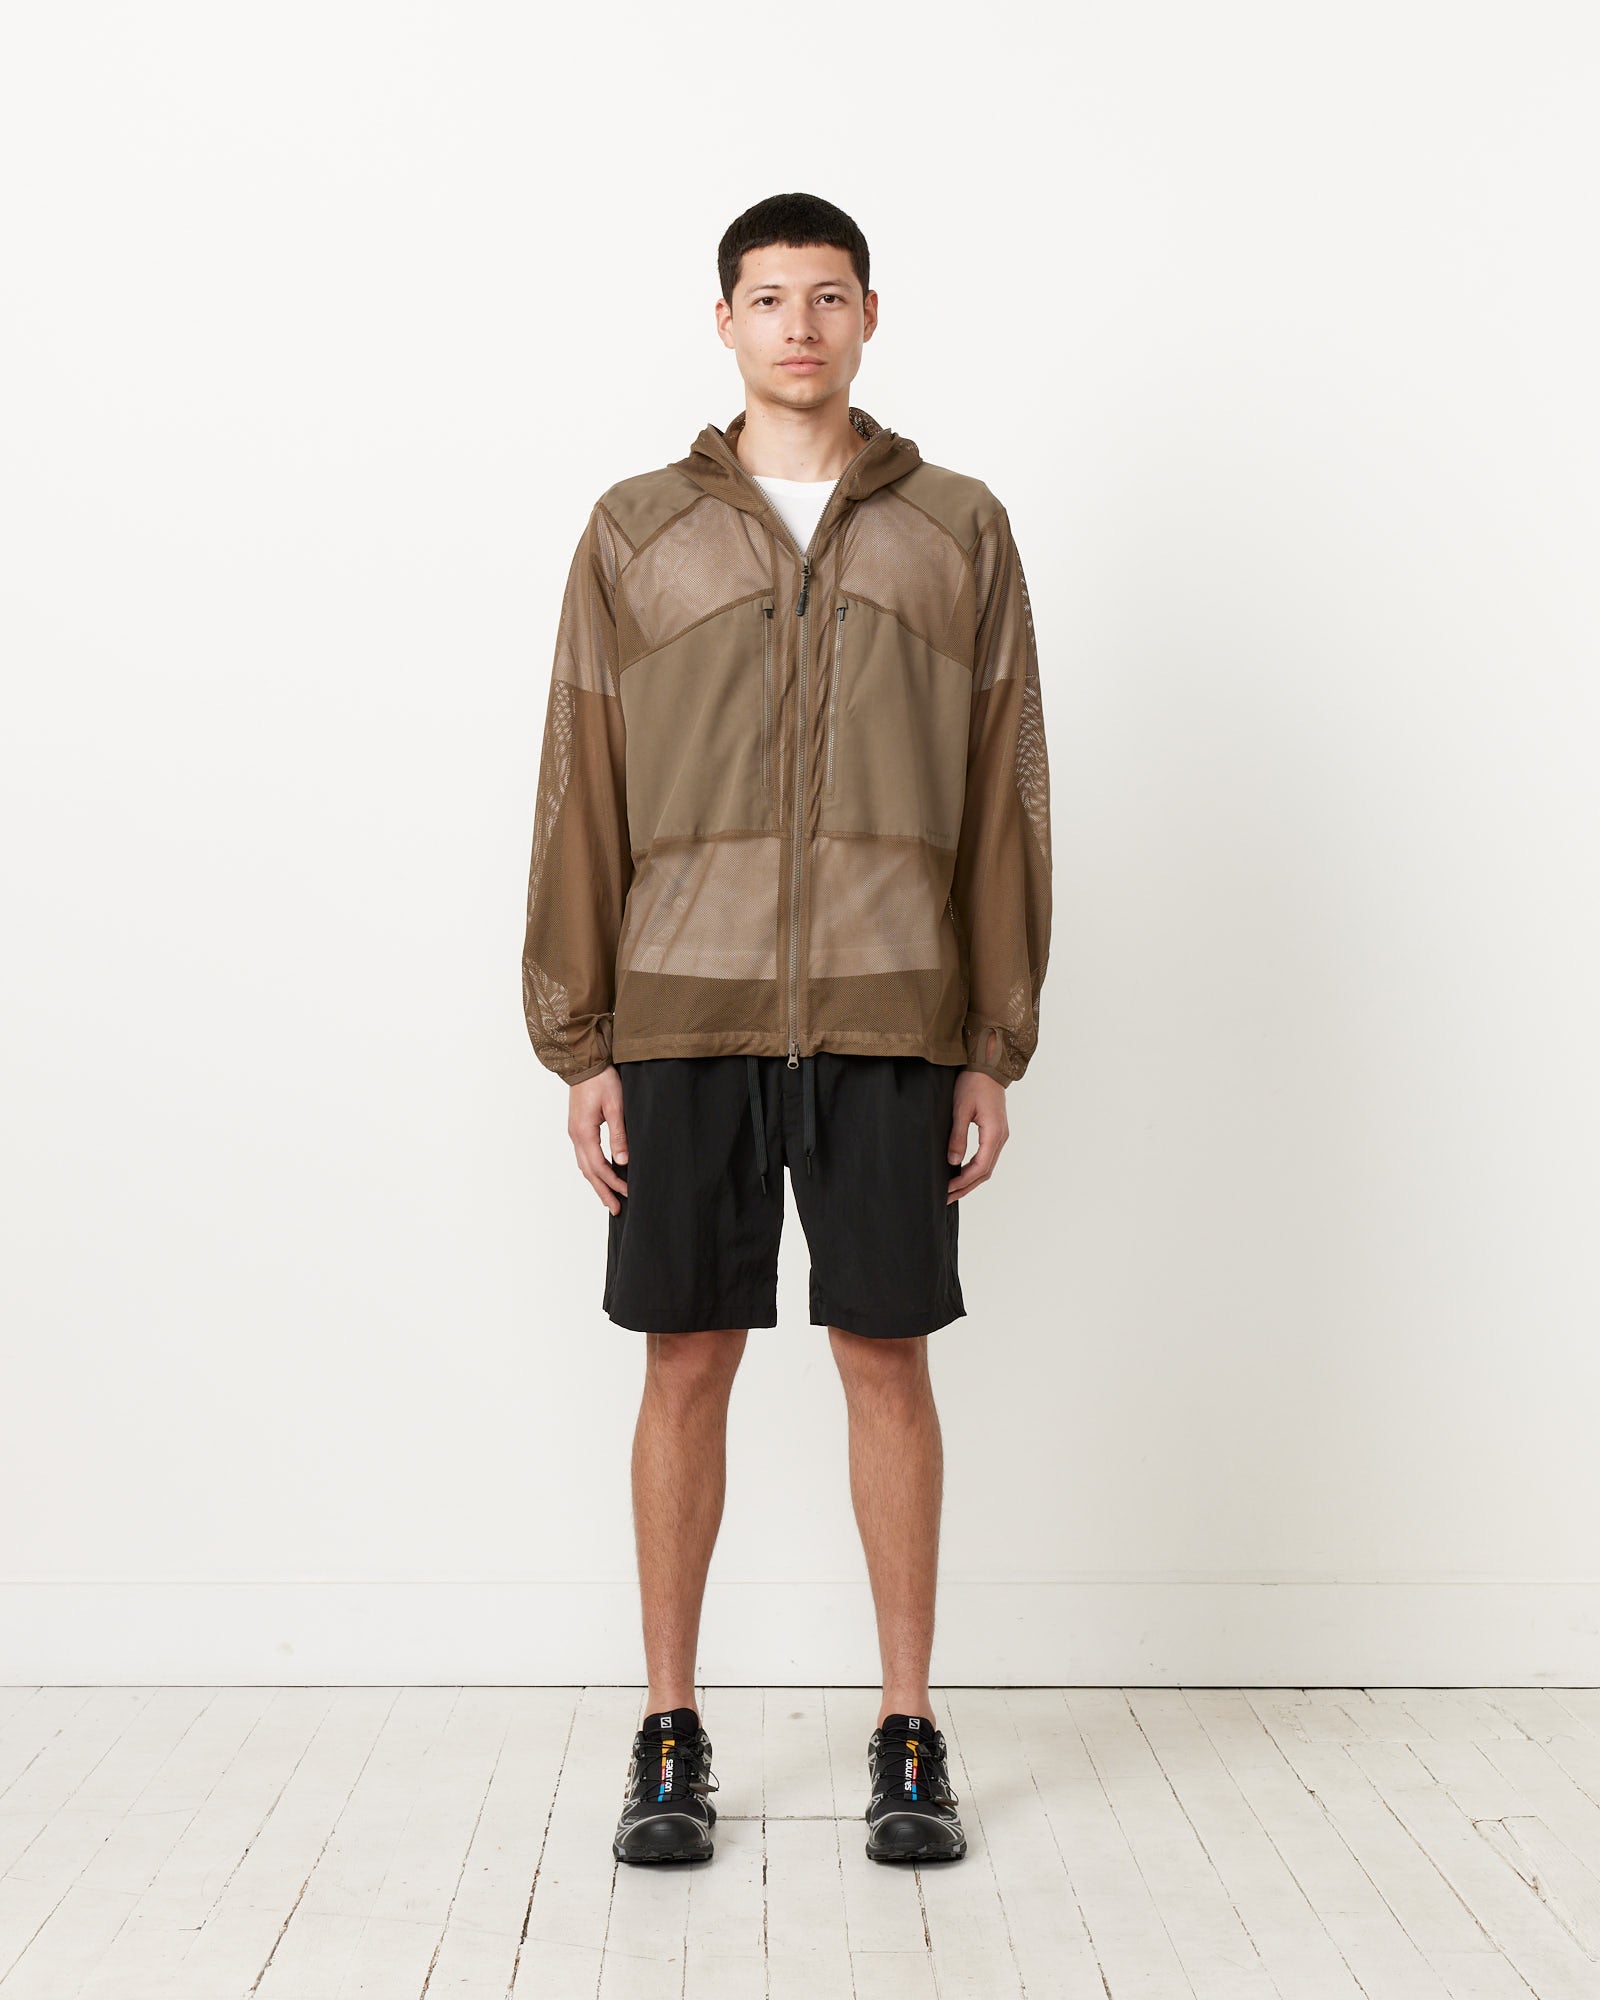 Insect Shield Mesh Jacket in Khaki